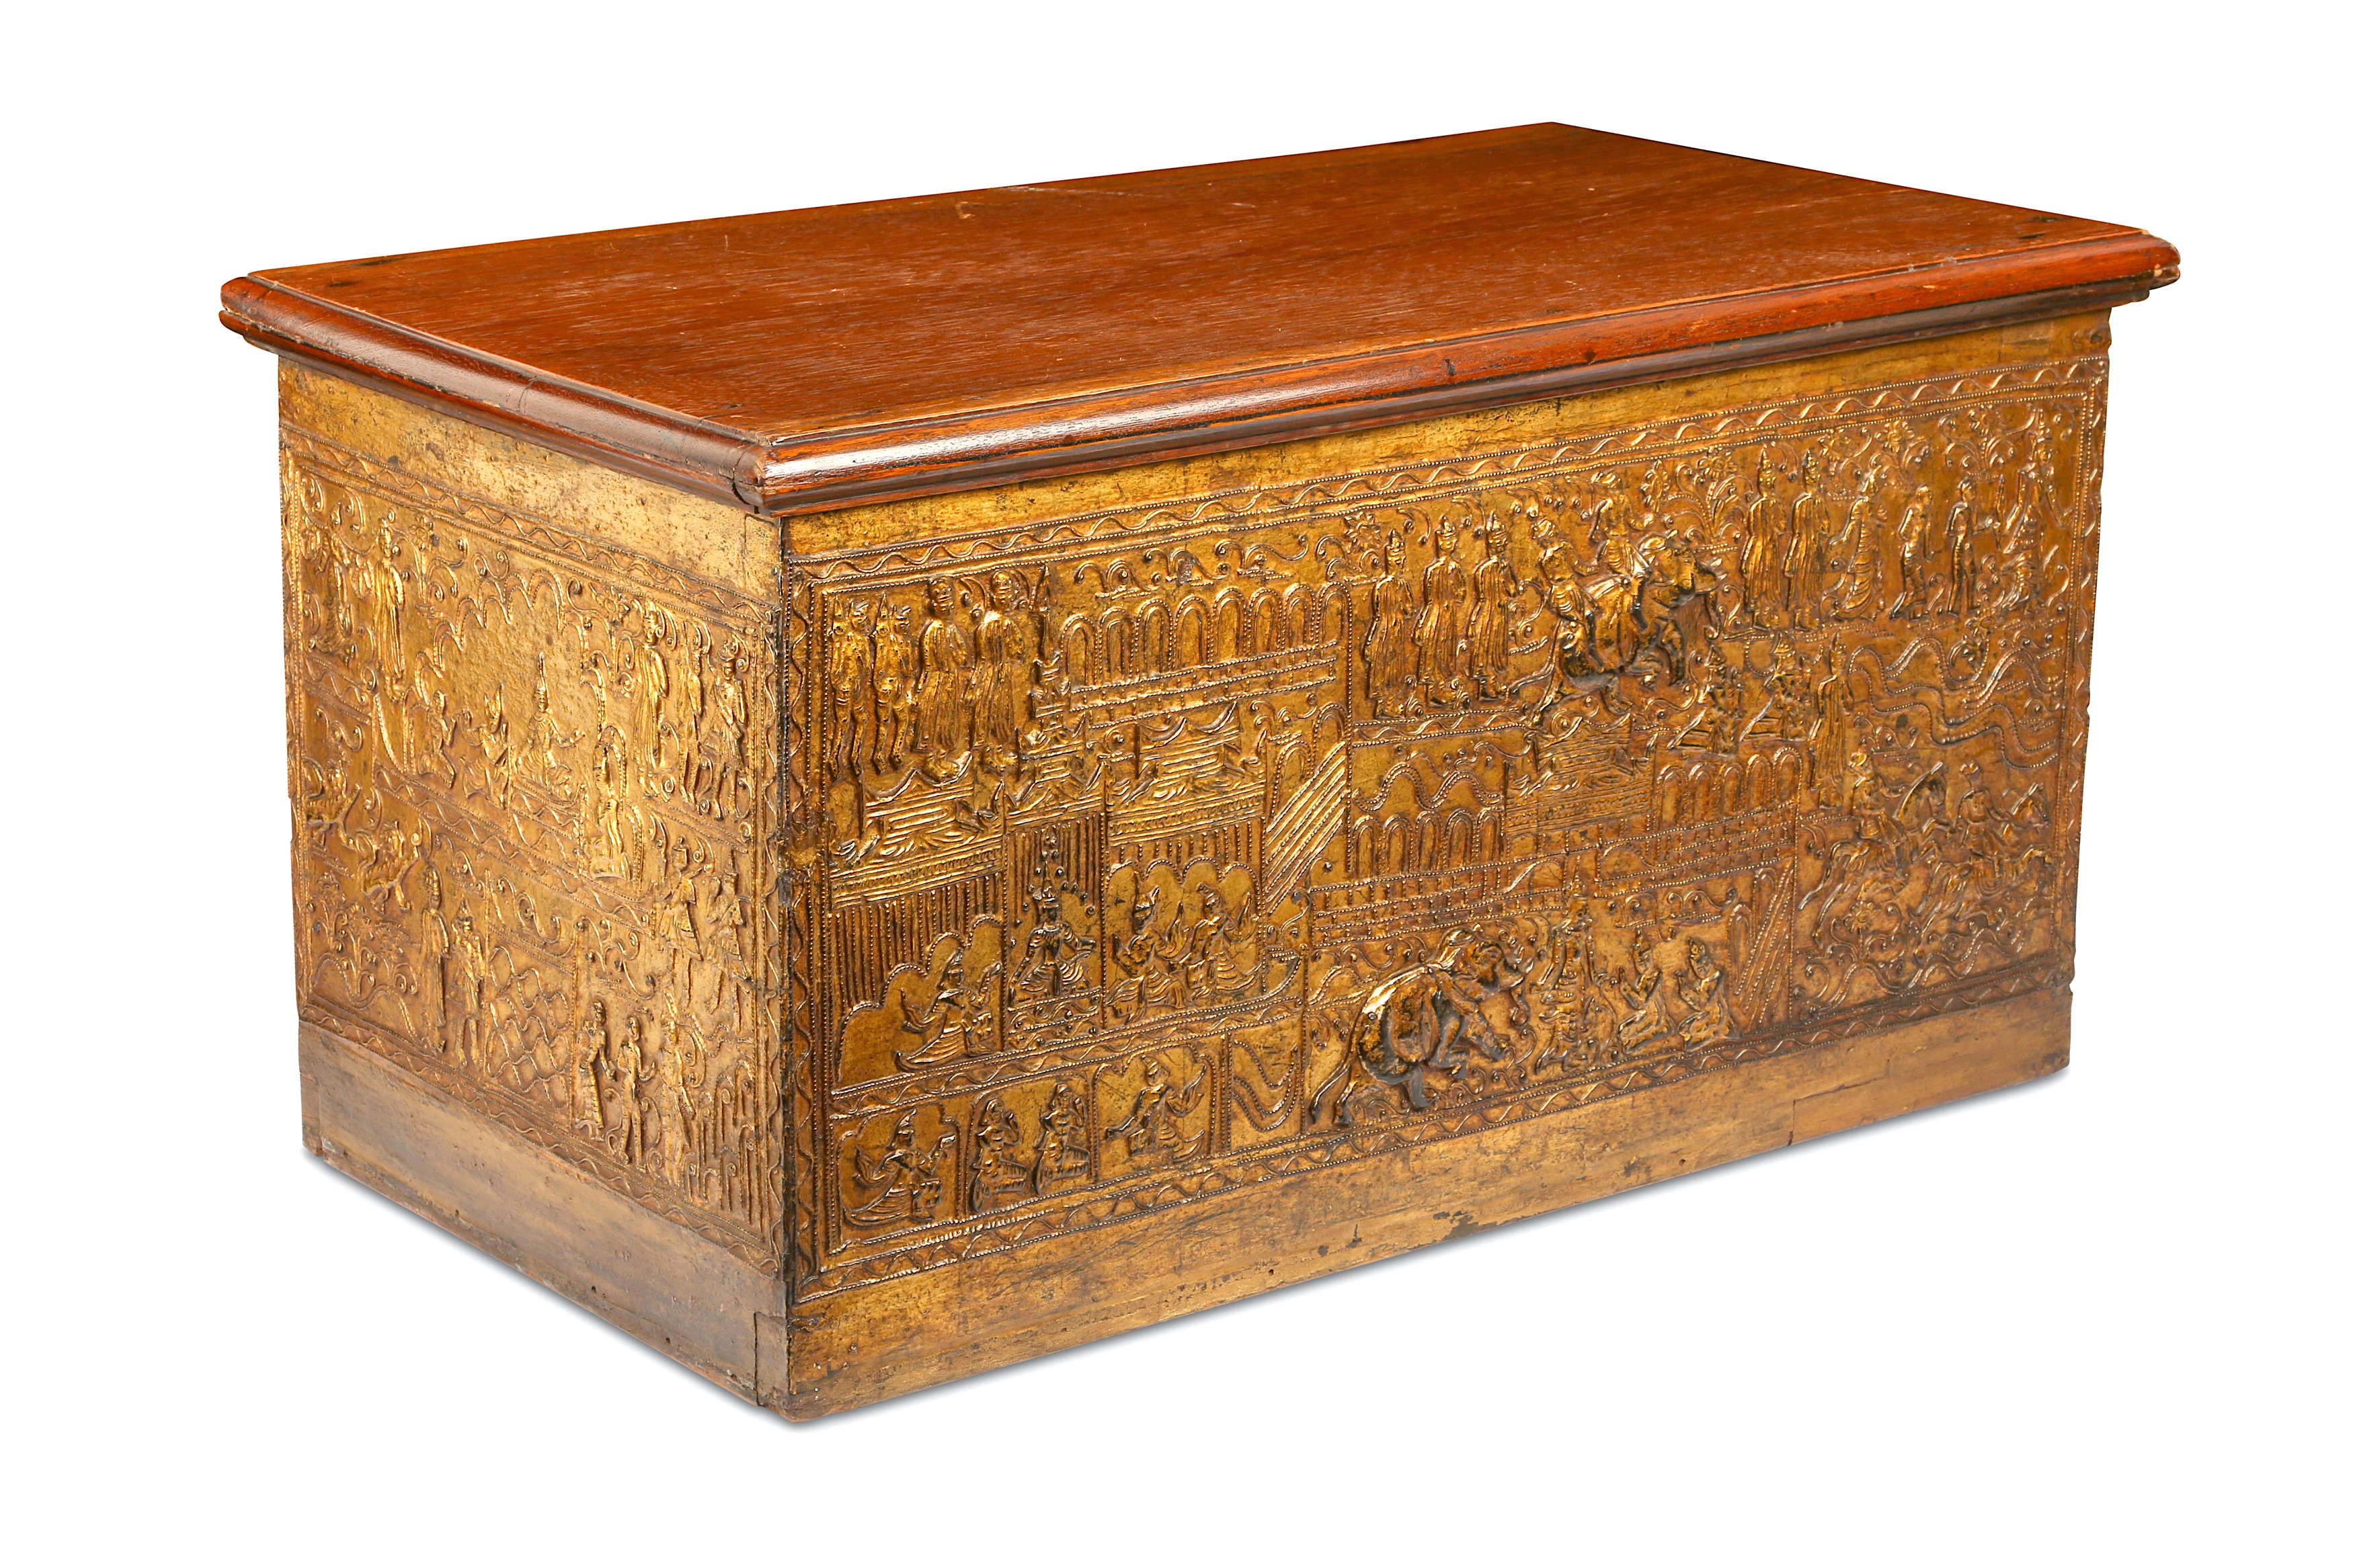 A GILDED LACQUER AND GESSO MANUSCRIPT STORAGE CABINET